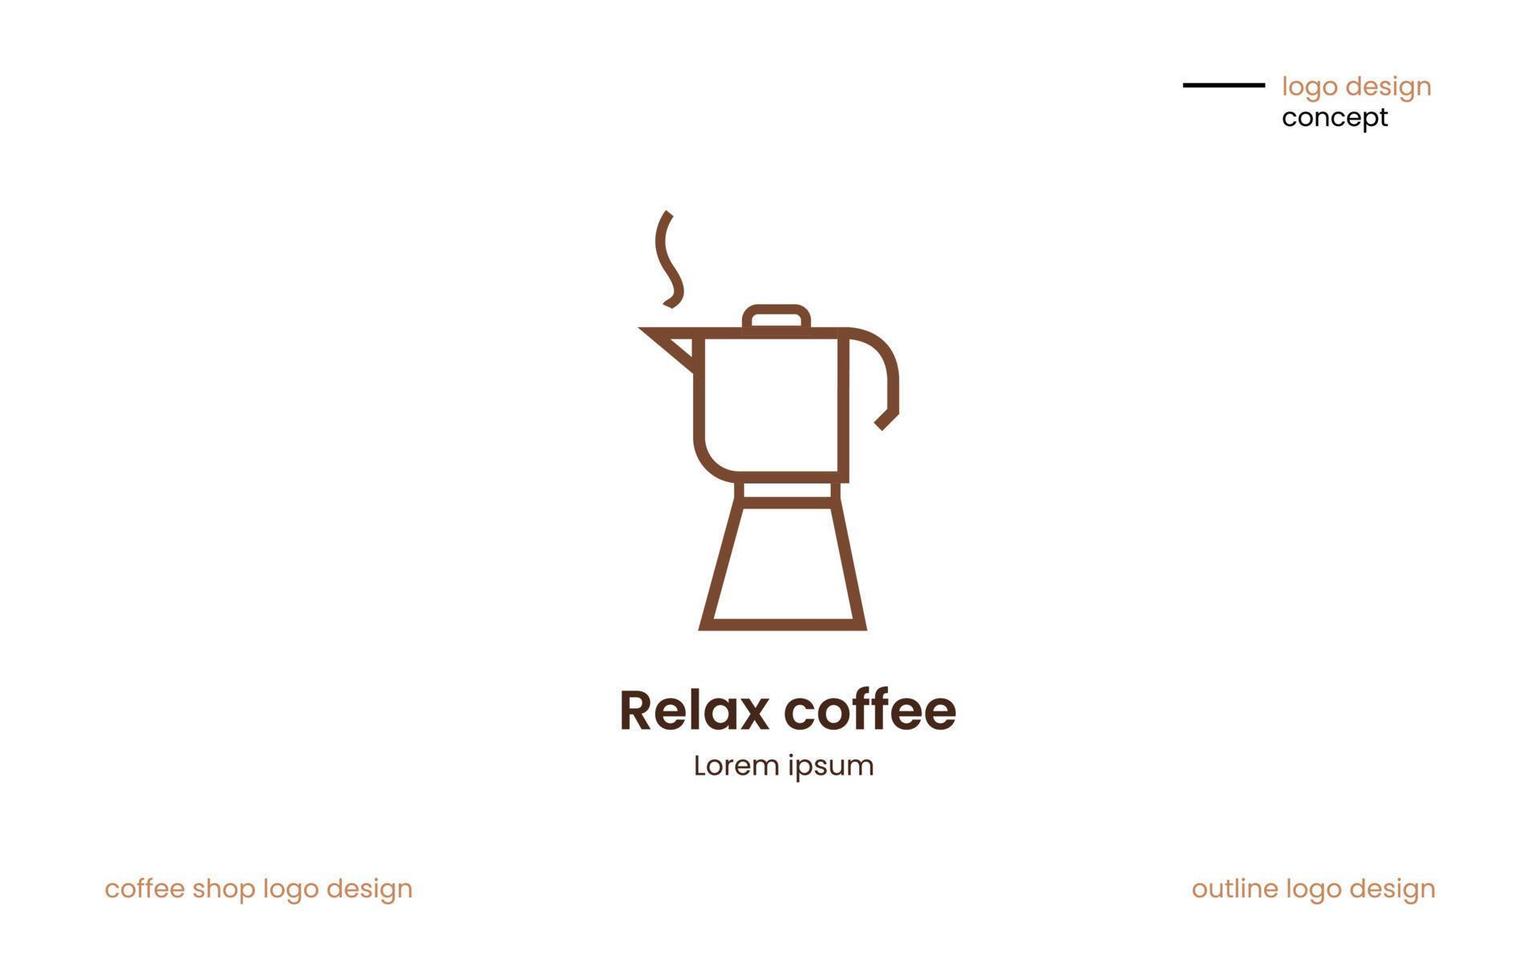 logo design or it can also be used for coffee shop ilustration designs. logo design with moka pot as symbol vector